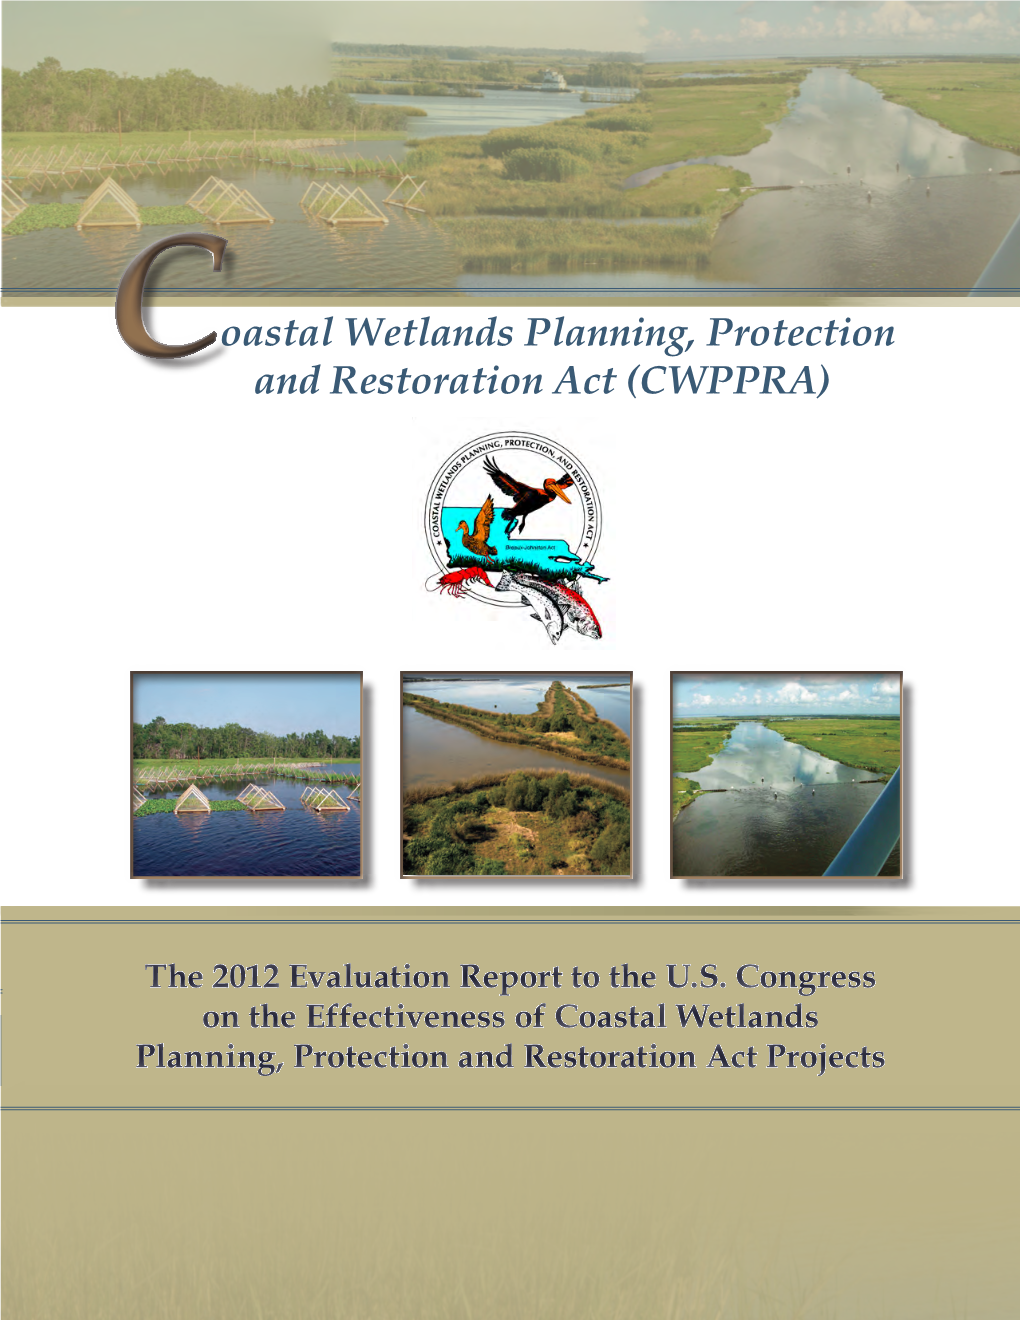 Oastal Wetlands Planning, Protection and Restoration Act Projects